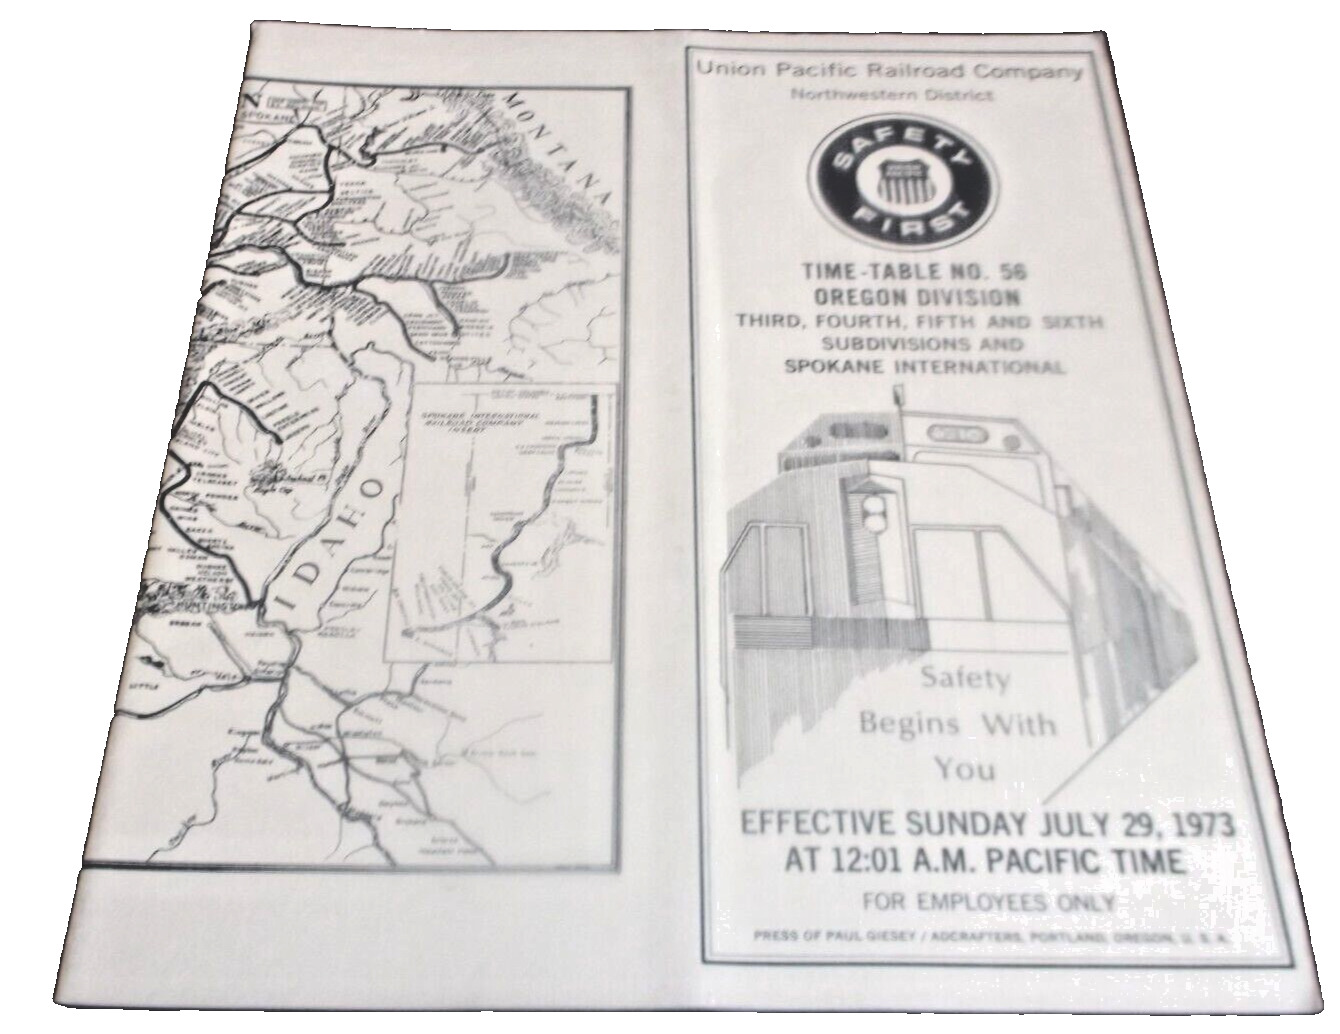 JULY 1973 UNION PACIFIC OREGON DIVISION EMPLOYEE TIMETABLE #56